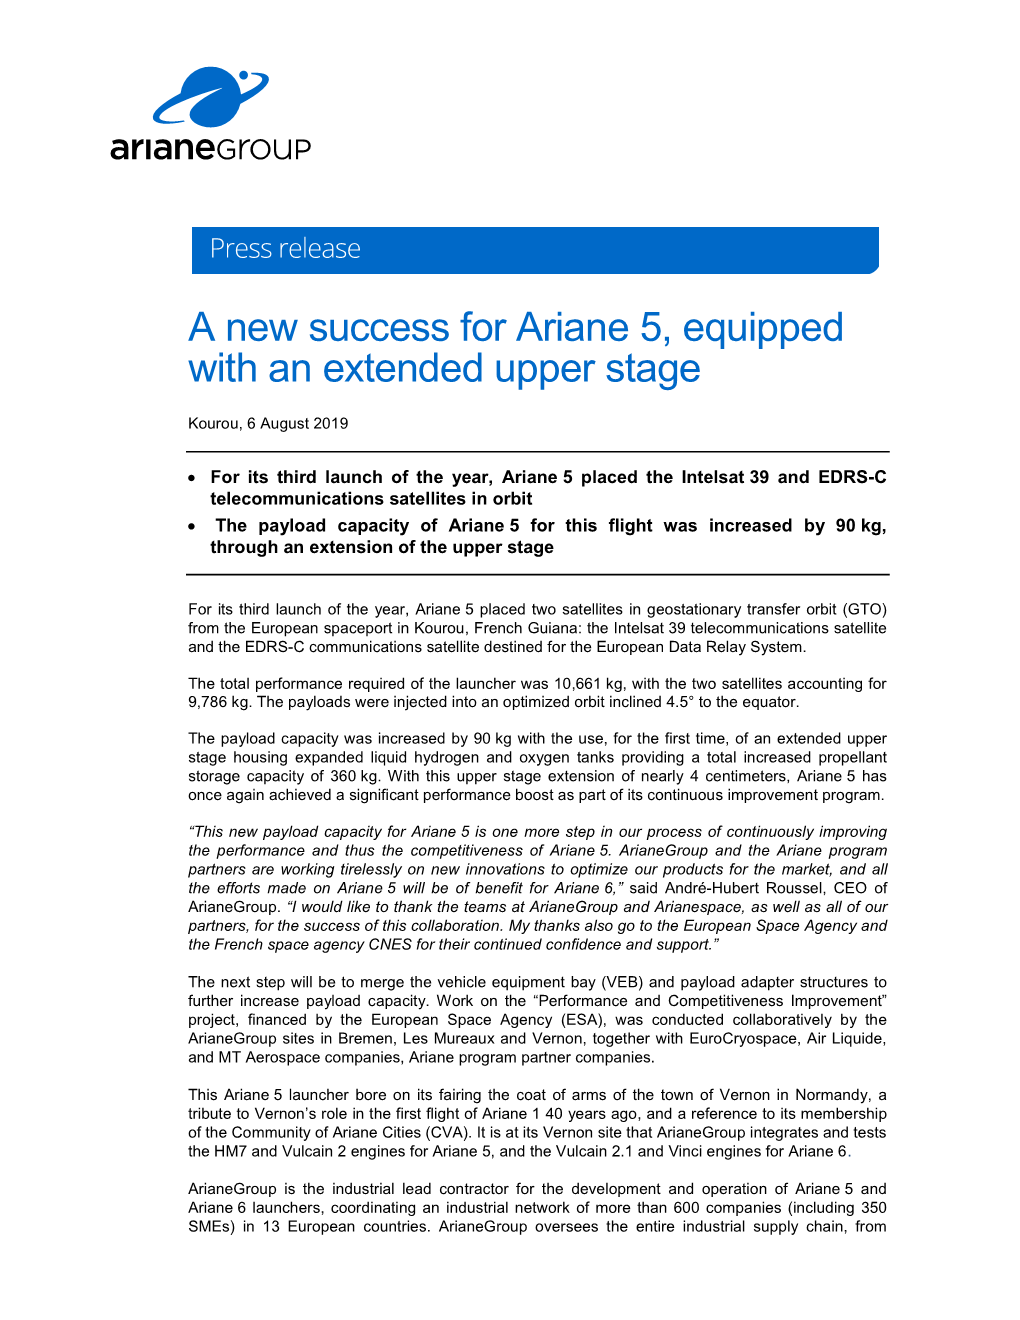 A New Success for Ariane 5, Equipped with an Extended Upper Stage